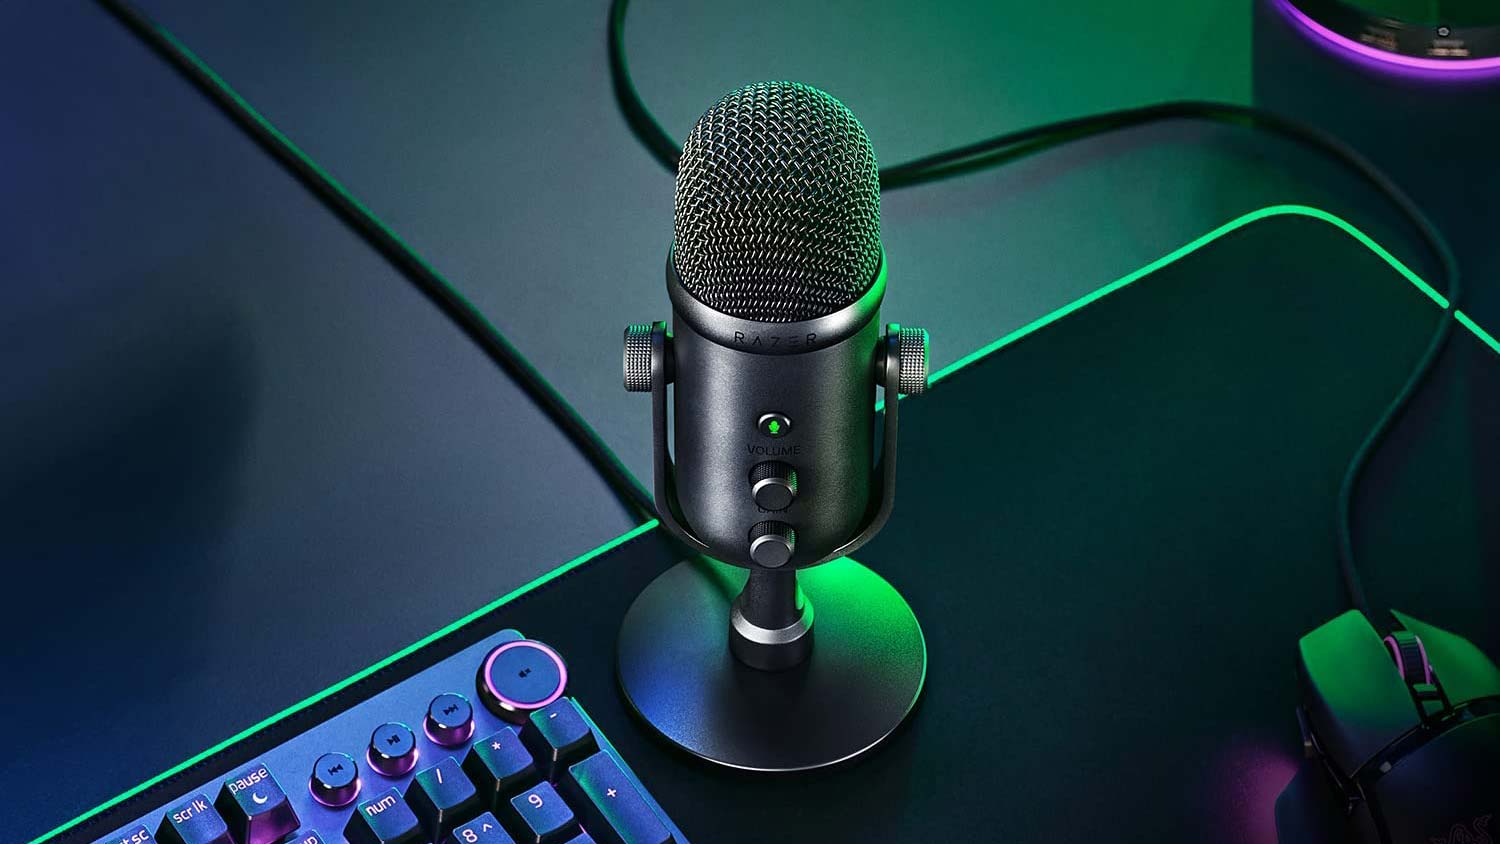 Razer's Seiren X Mic Is Perfect for On-The-Go Streamers